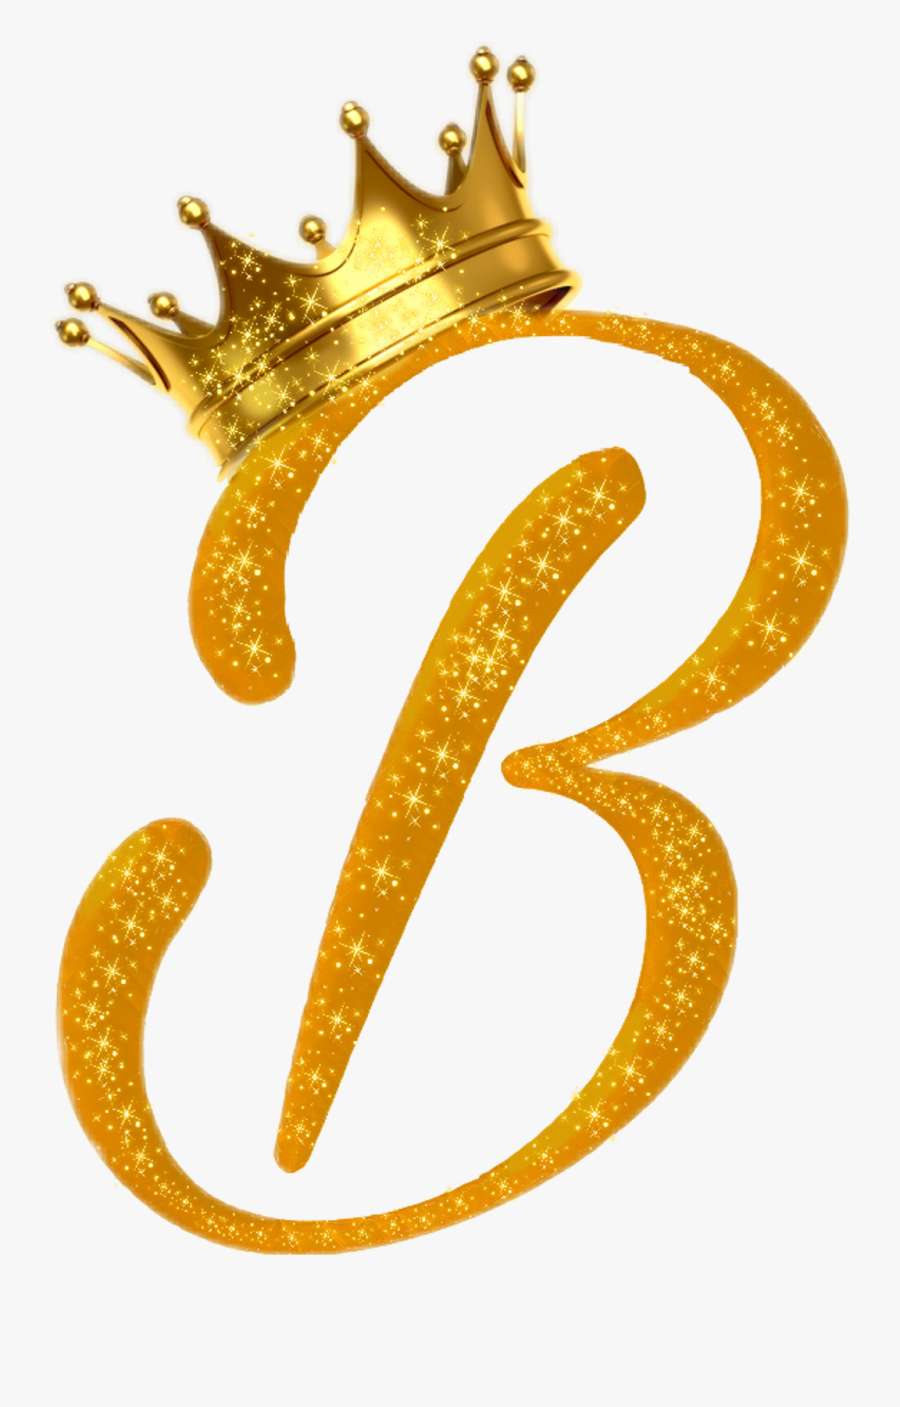 Crown Clipart Letter - Letter B With A Crown, Transparent Clipart